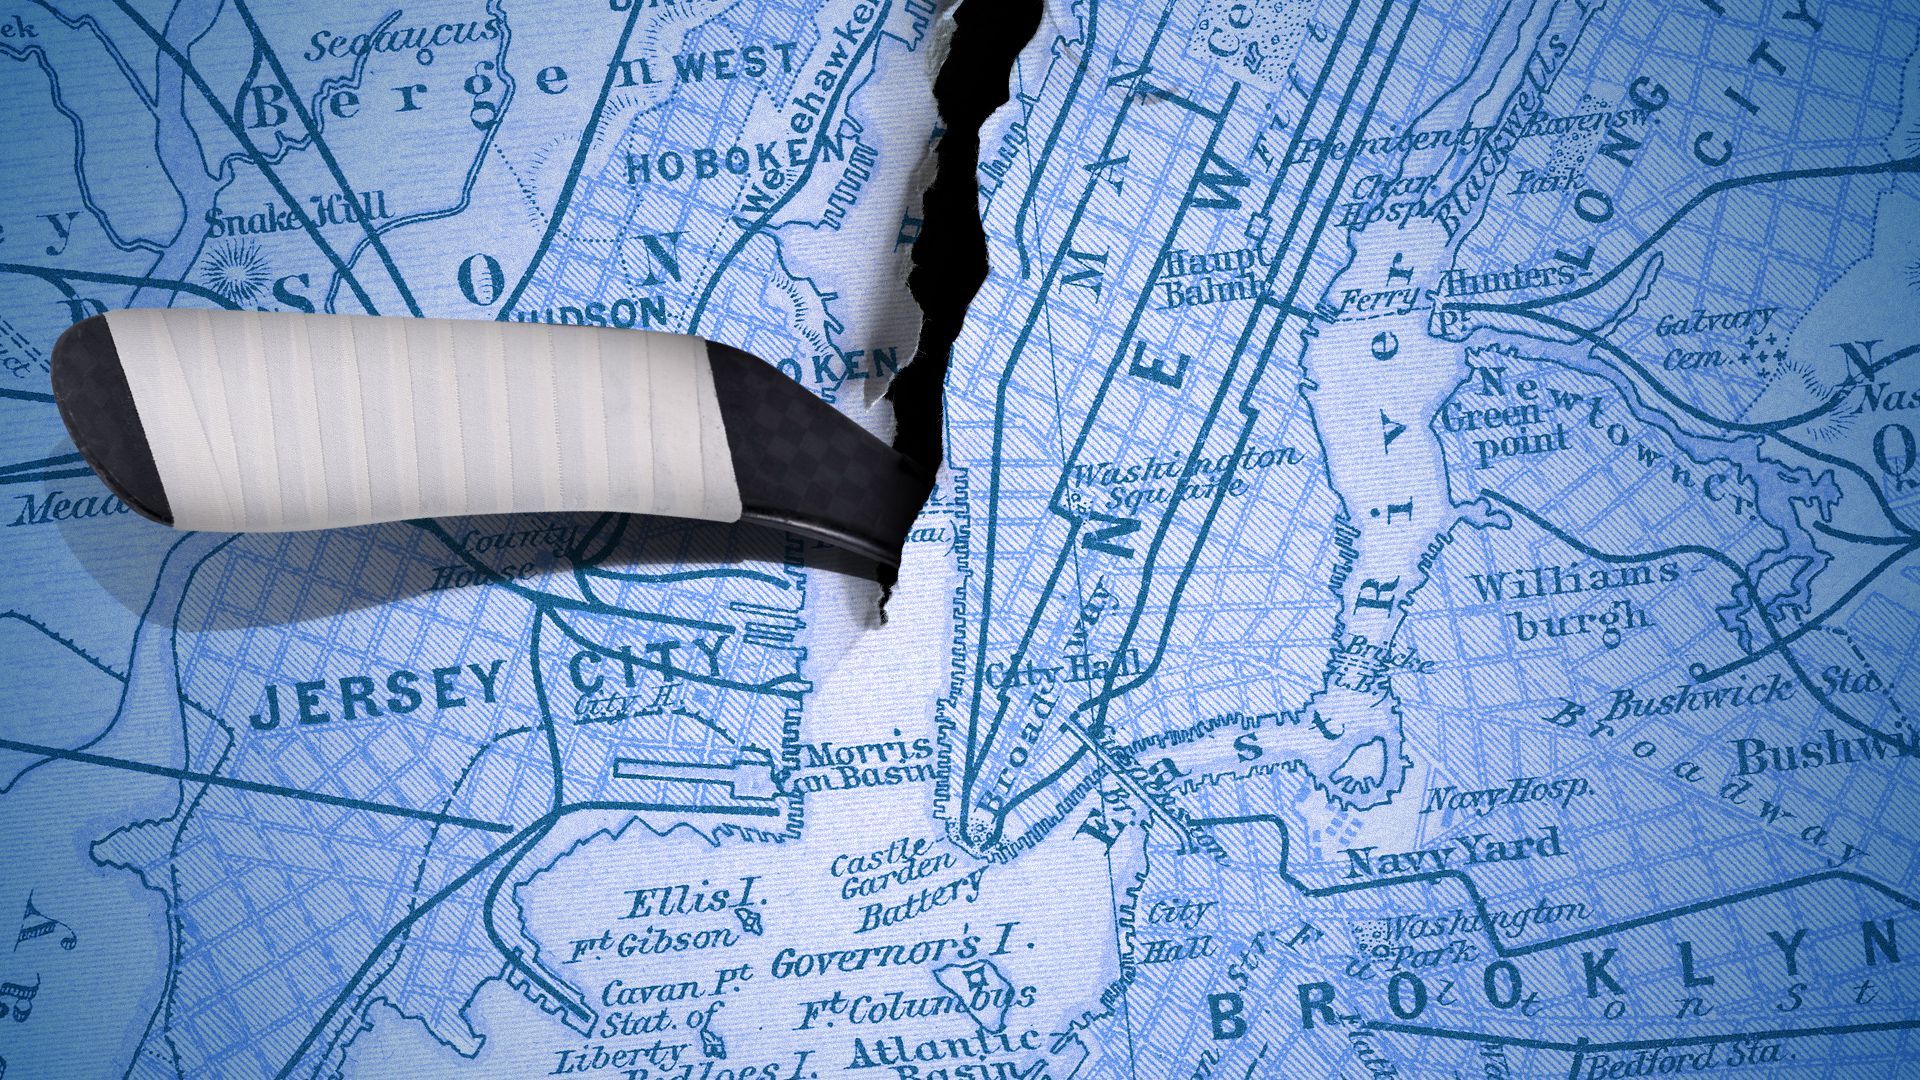 Illustration of a hockey stick tearing a map of New Jersey and New York down the middle along the Hudson. 